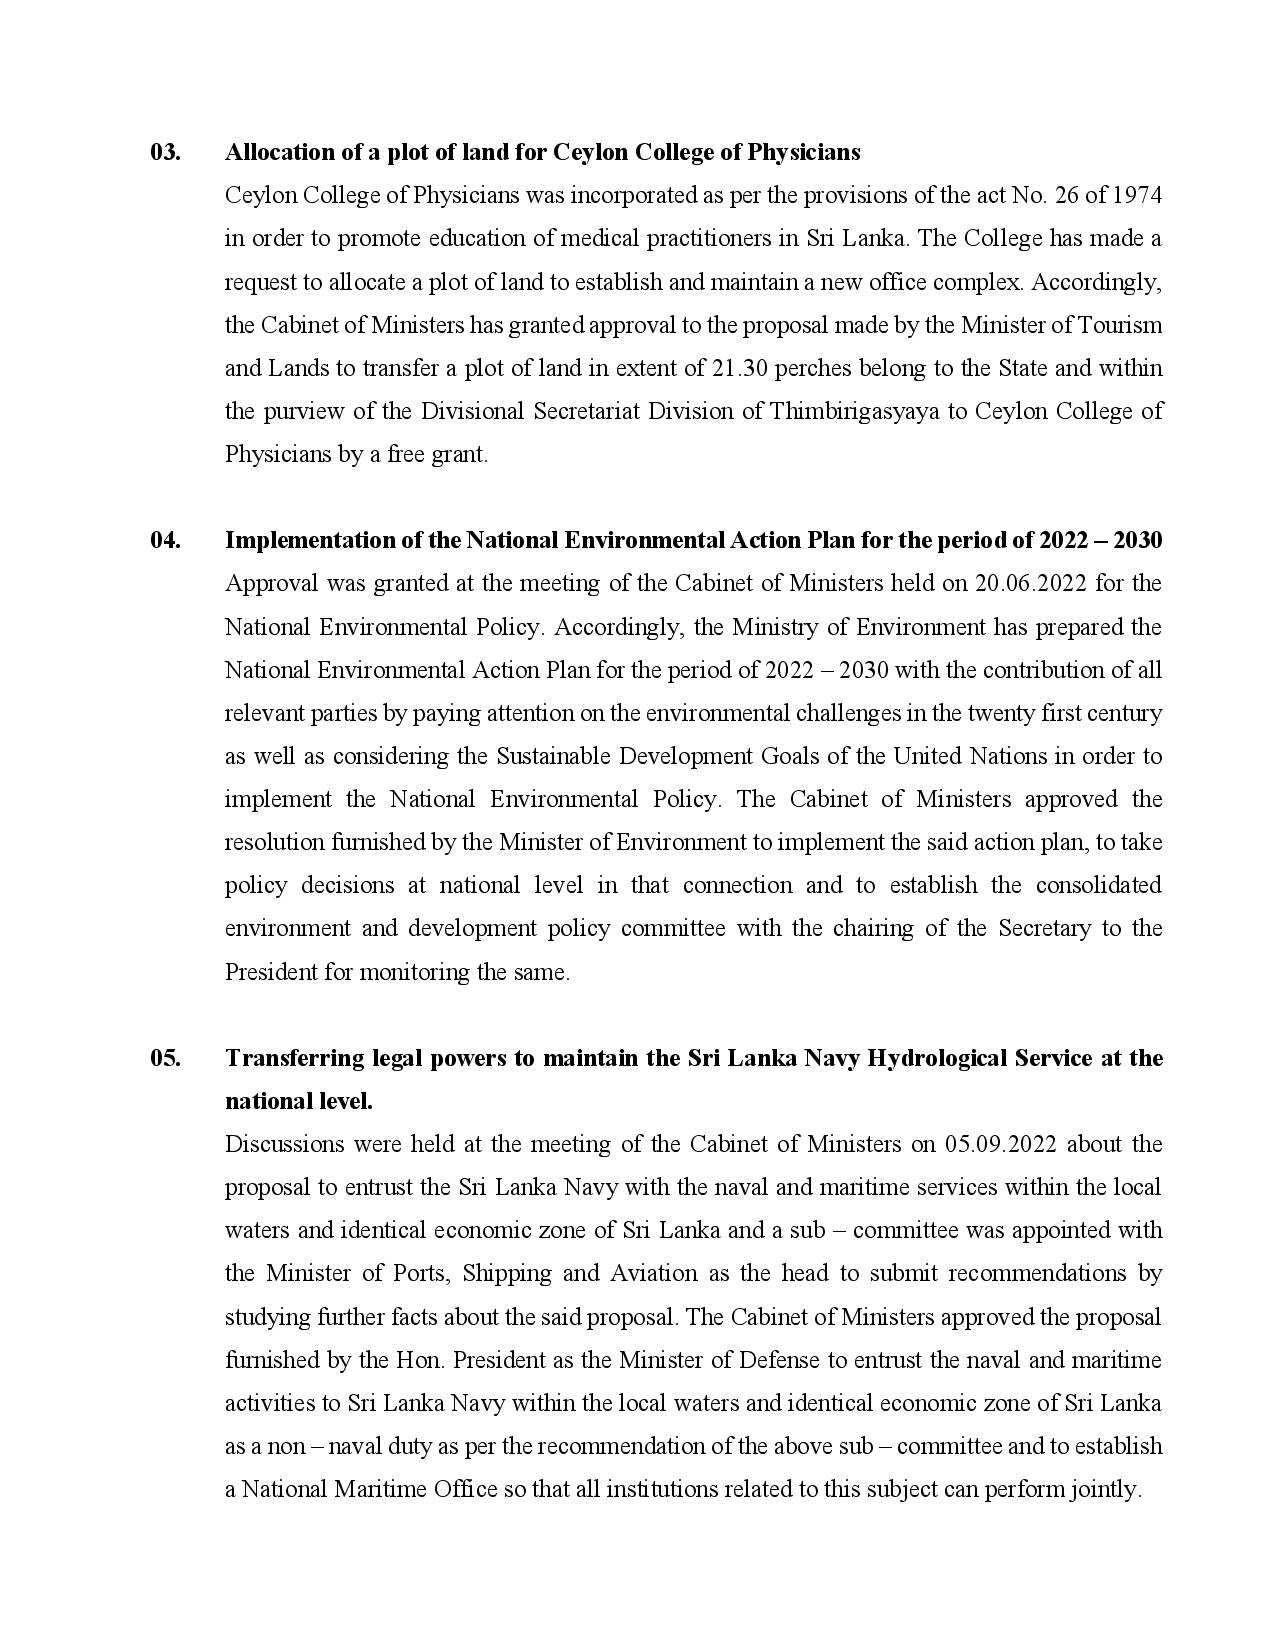 Cabinet Decisiion on 05.12.2022 English page 002